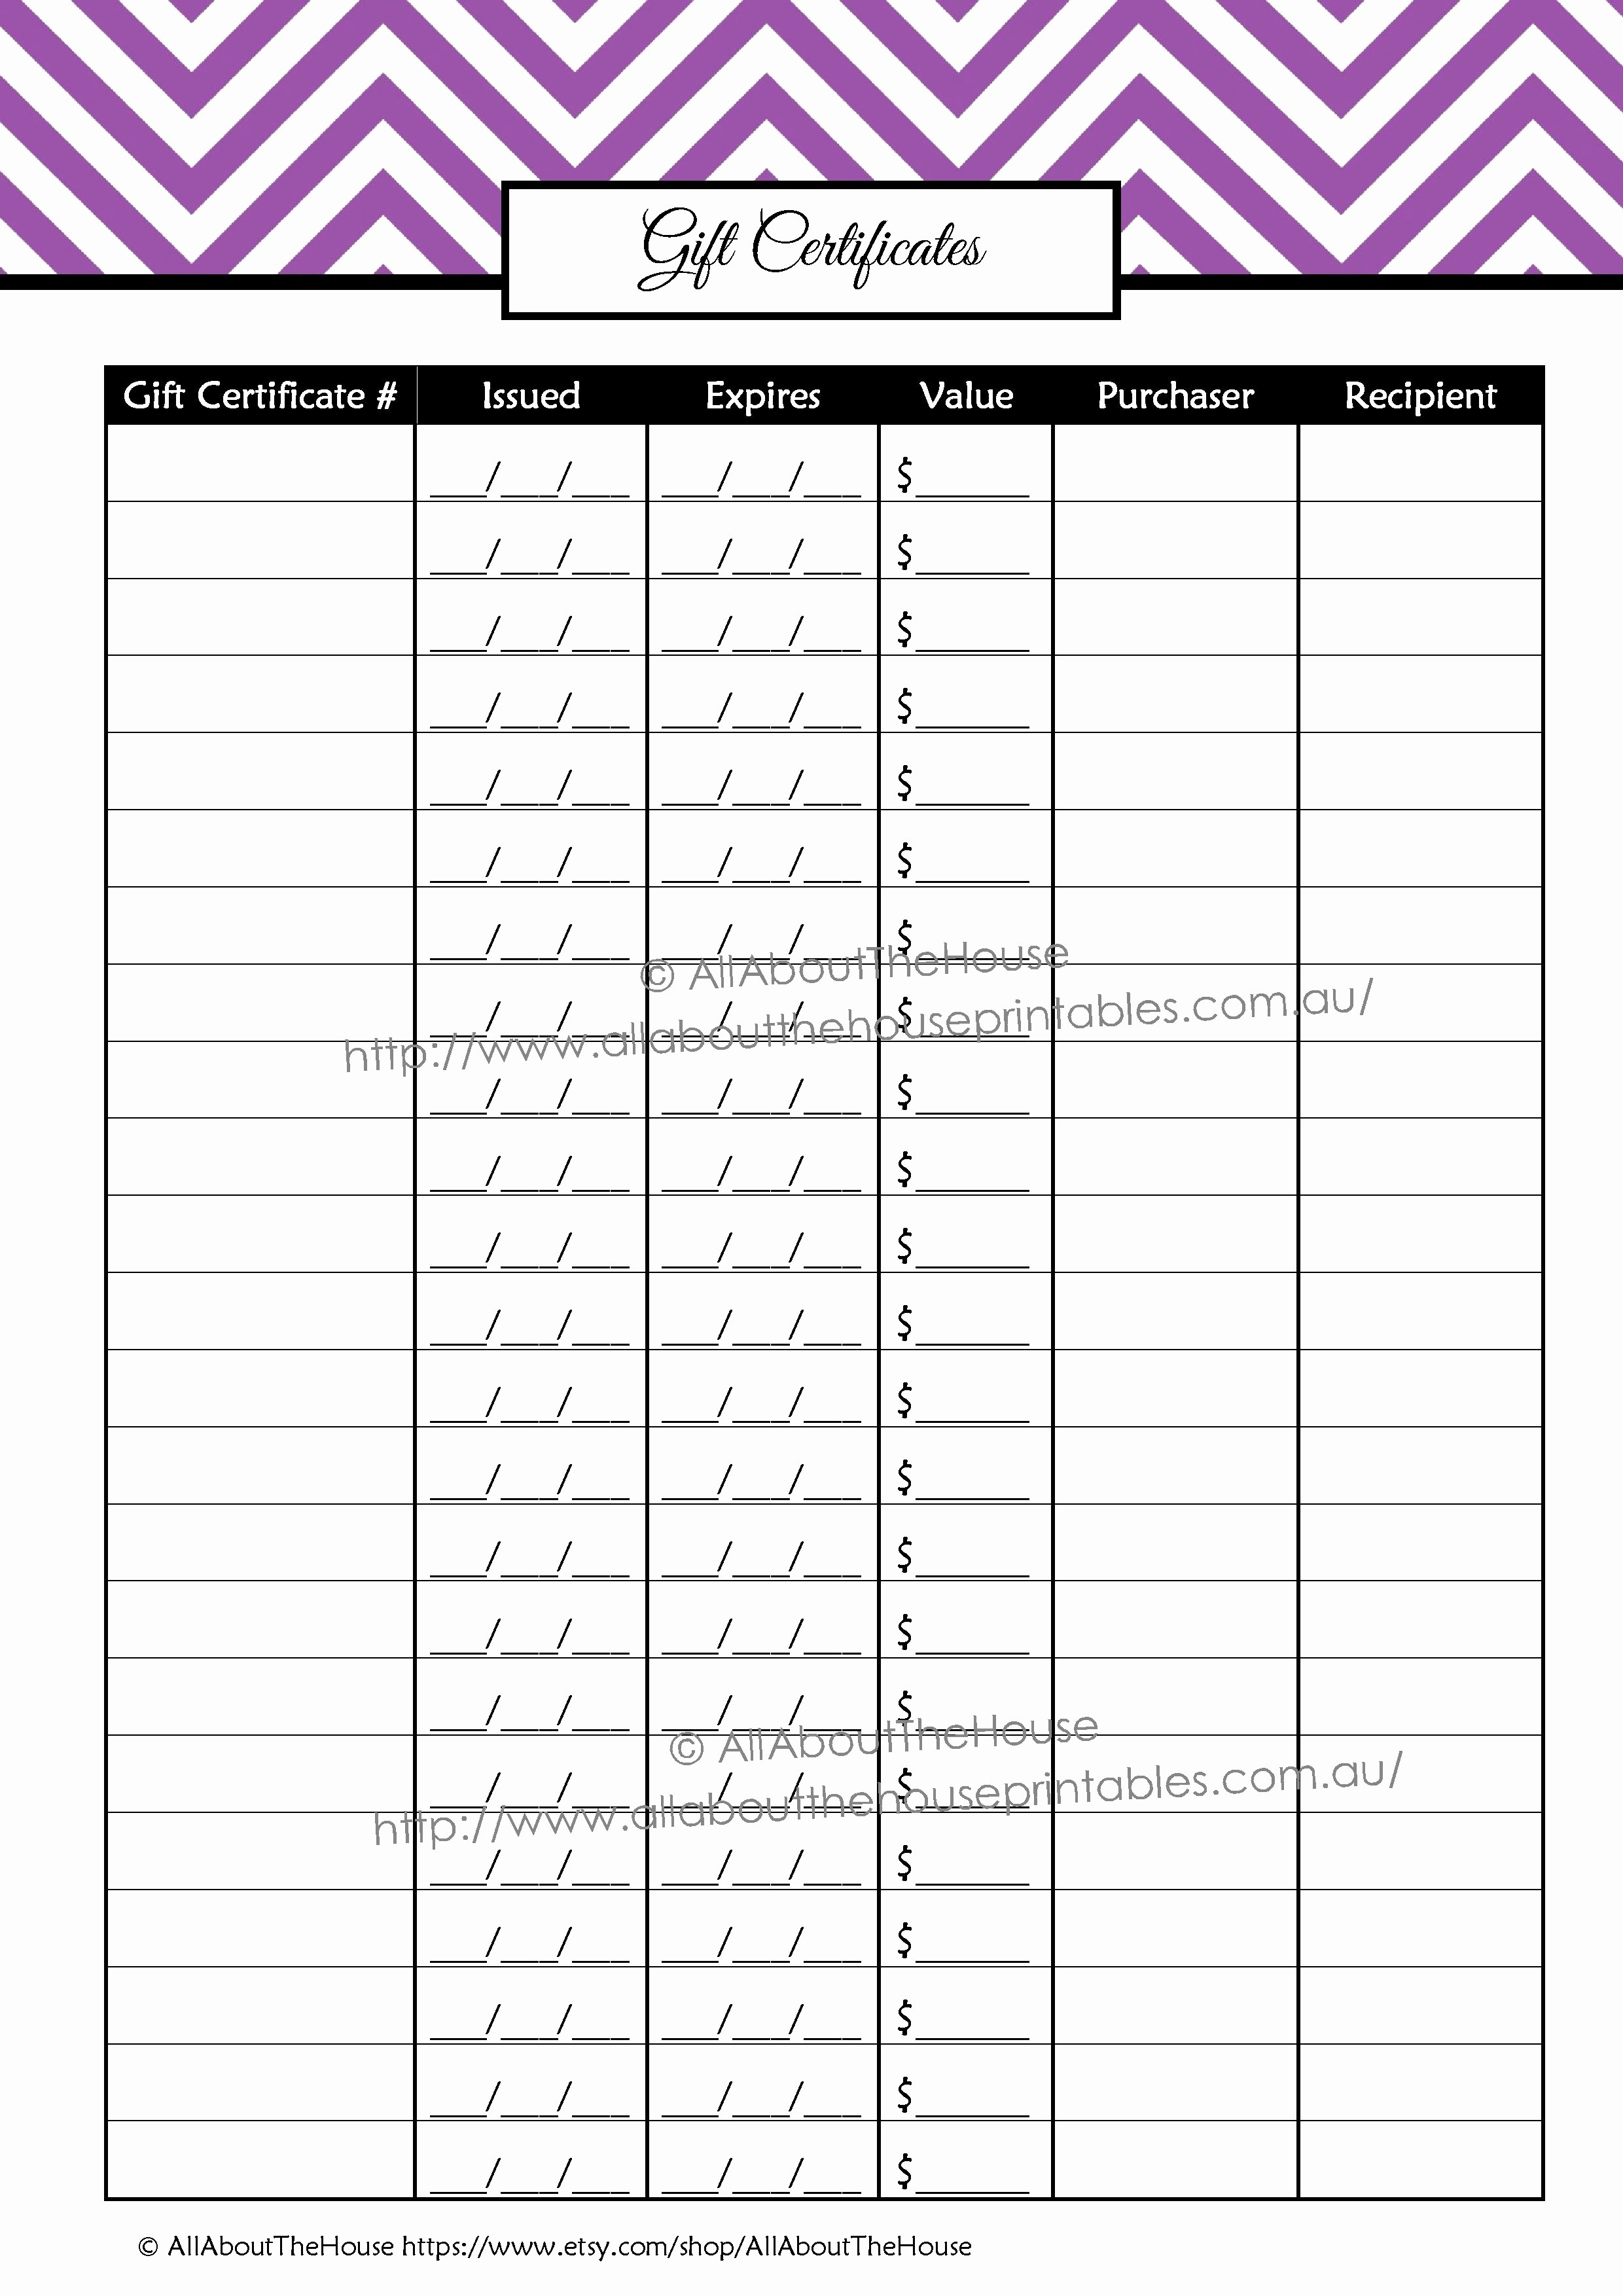 Tracking Sales Calls Spreadsheet New Document Direct Sheets